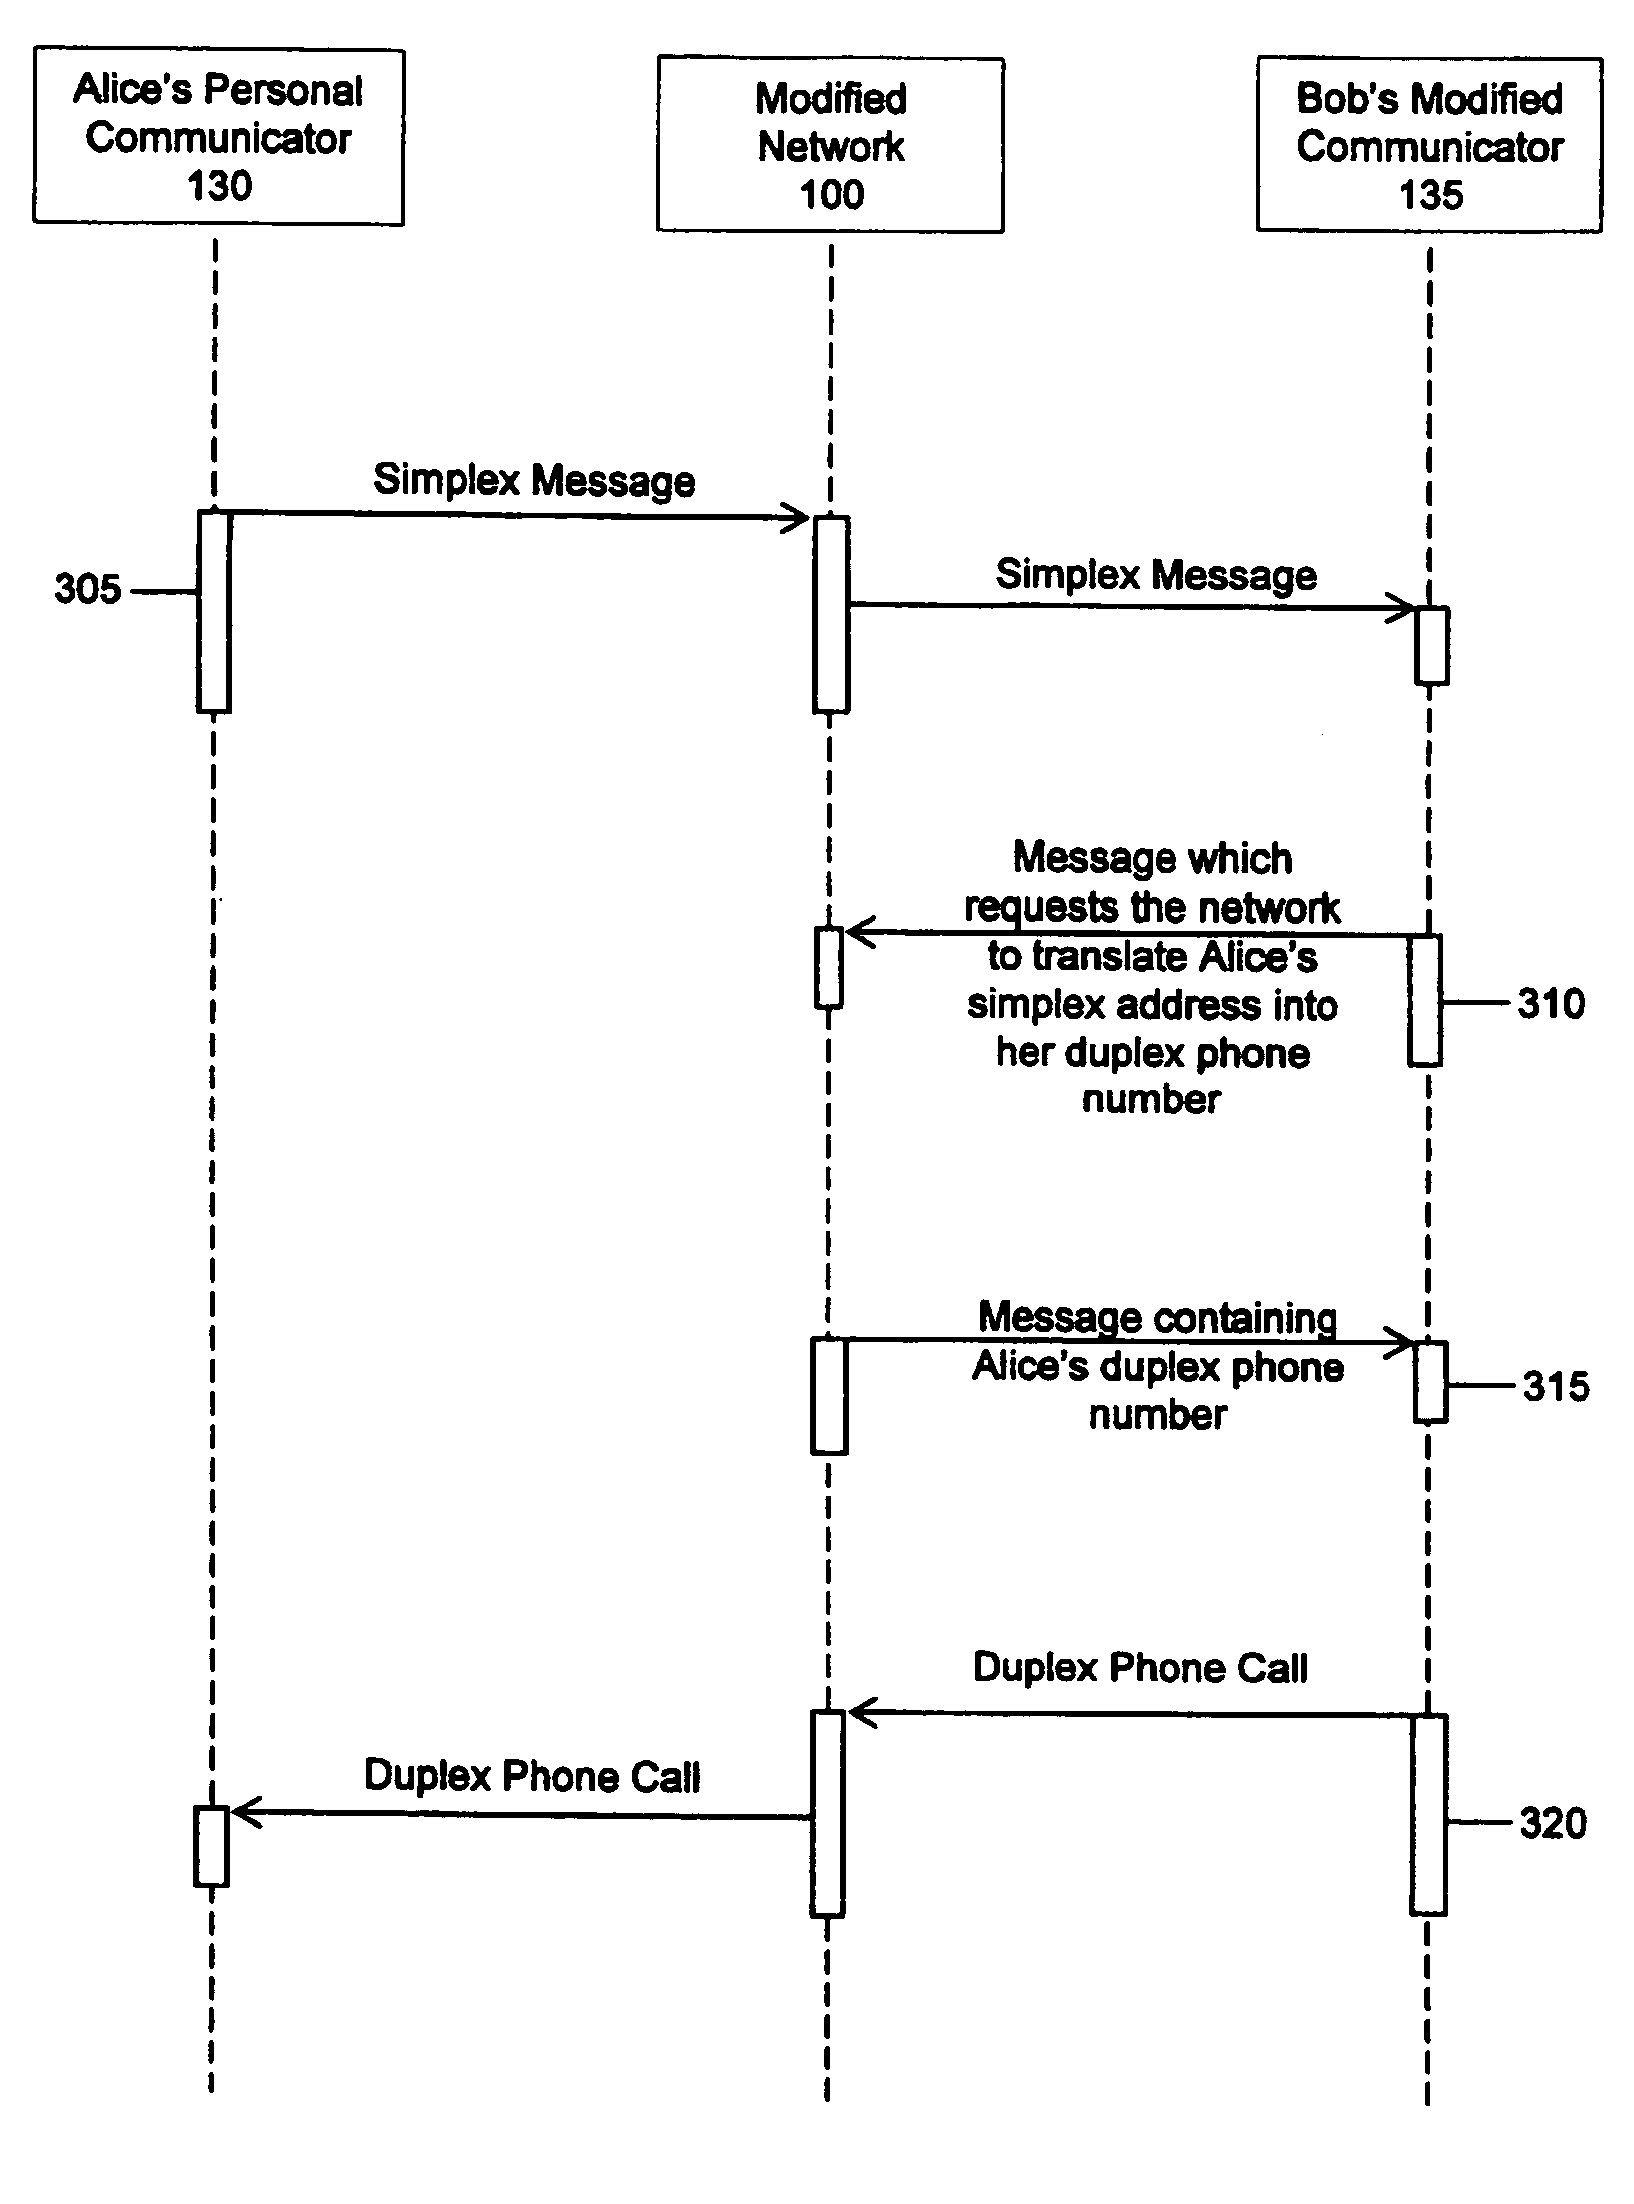 System and process using simplex and duplex communication protocols